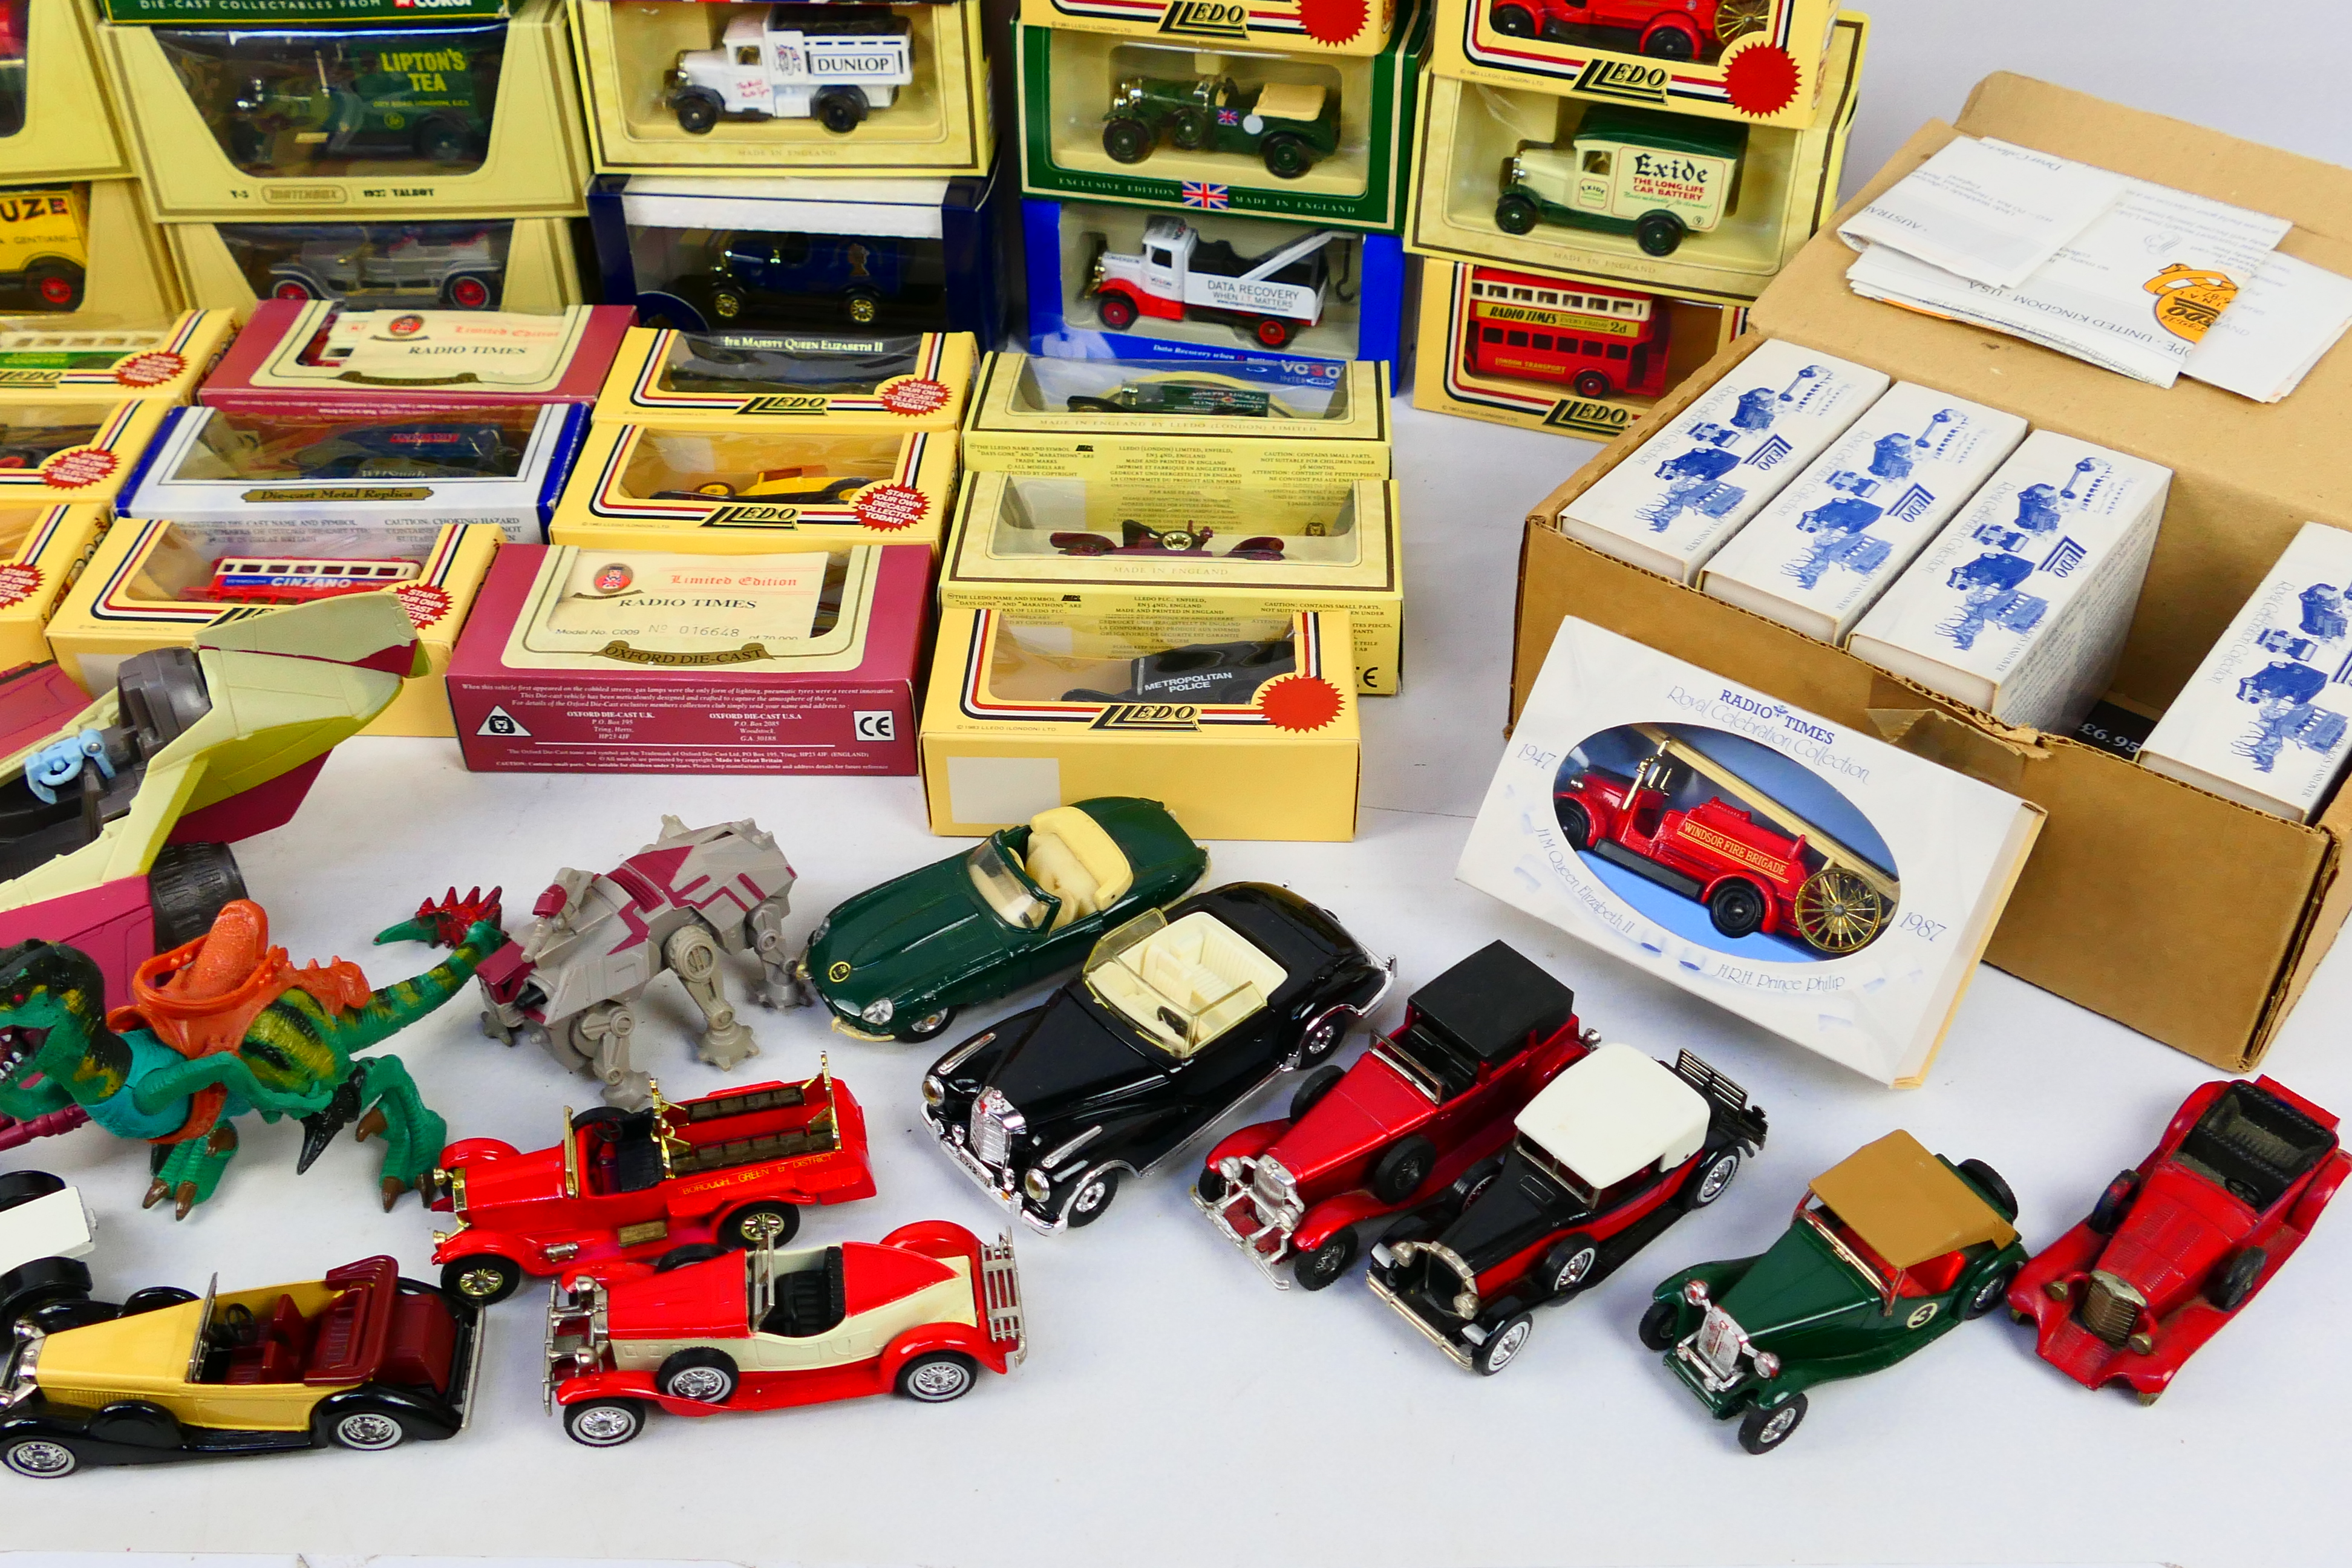 Matchbox - Lledo - A collection of vehicles including Talbot van in Lipton's Tea livery # Y-5, - Image 3 of 5